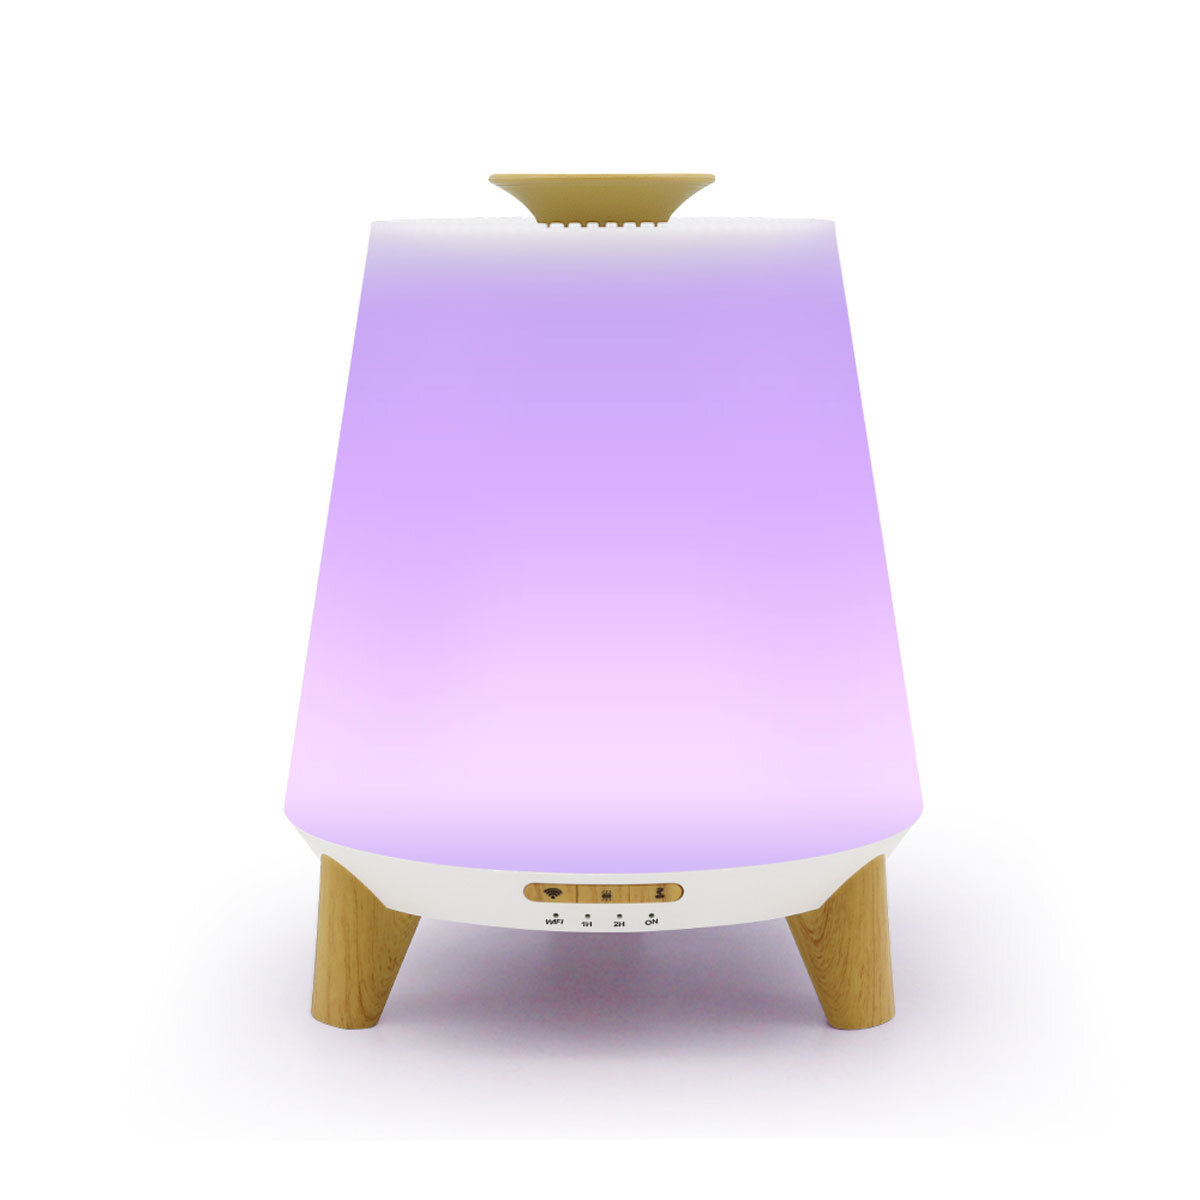 Image of Vybra Atmos Diffuser in pink